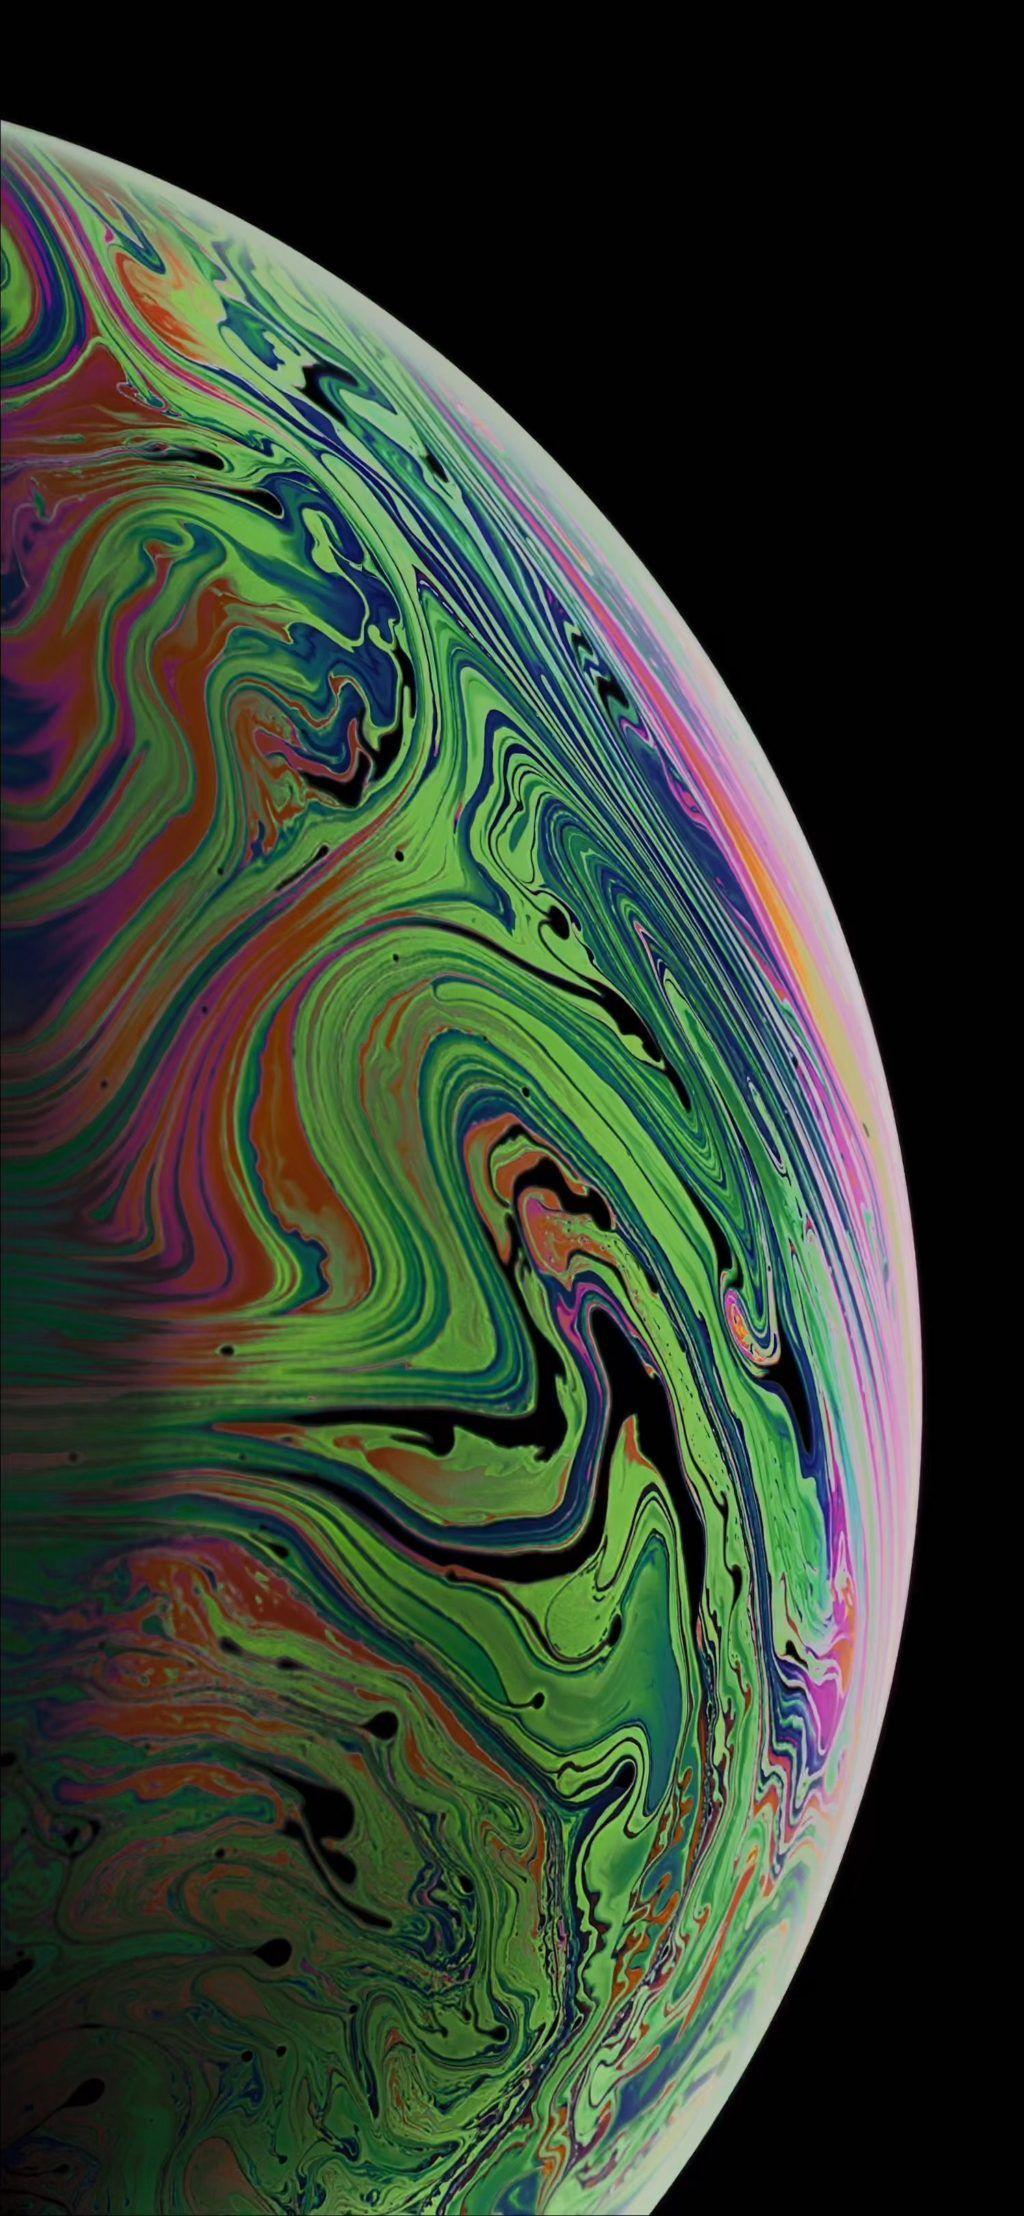 Download: iPhone XS and iPhone XS Max Wallpaper